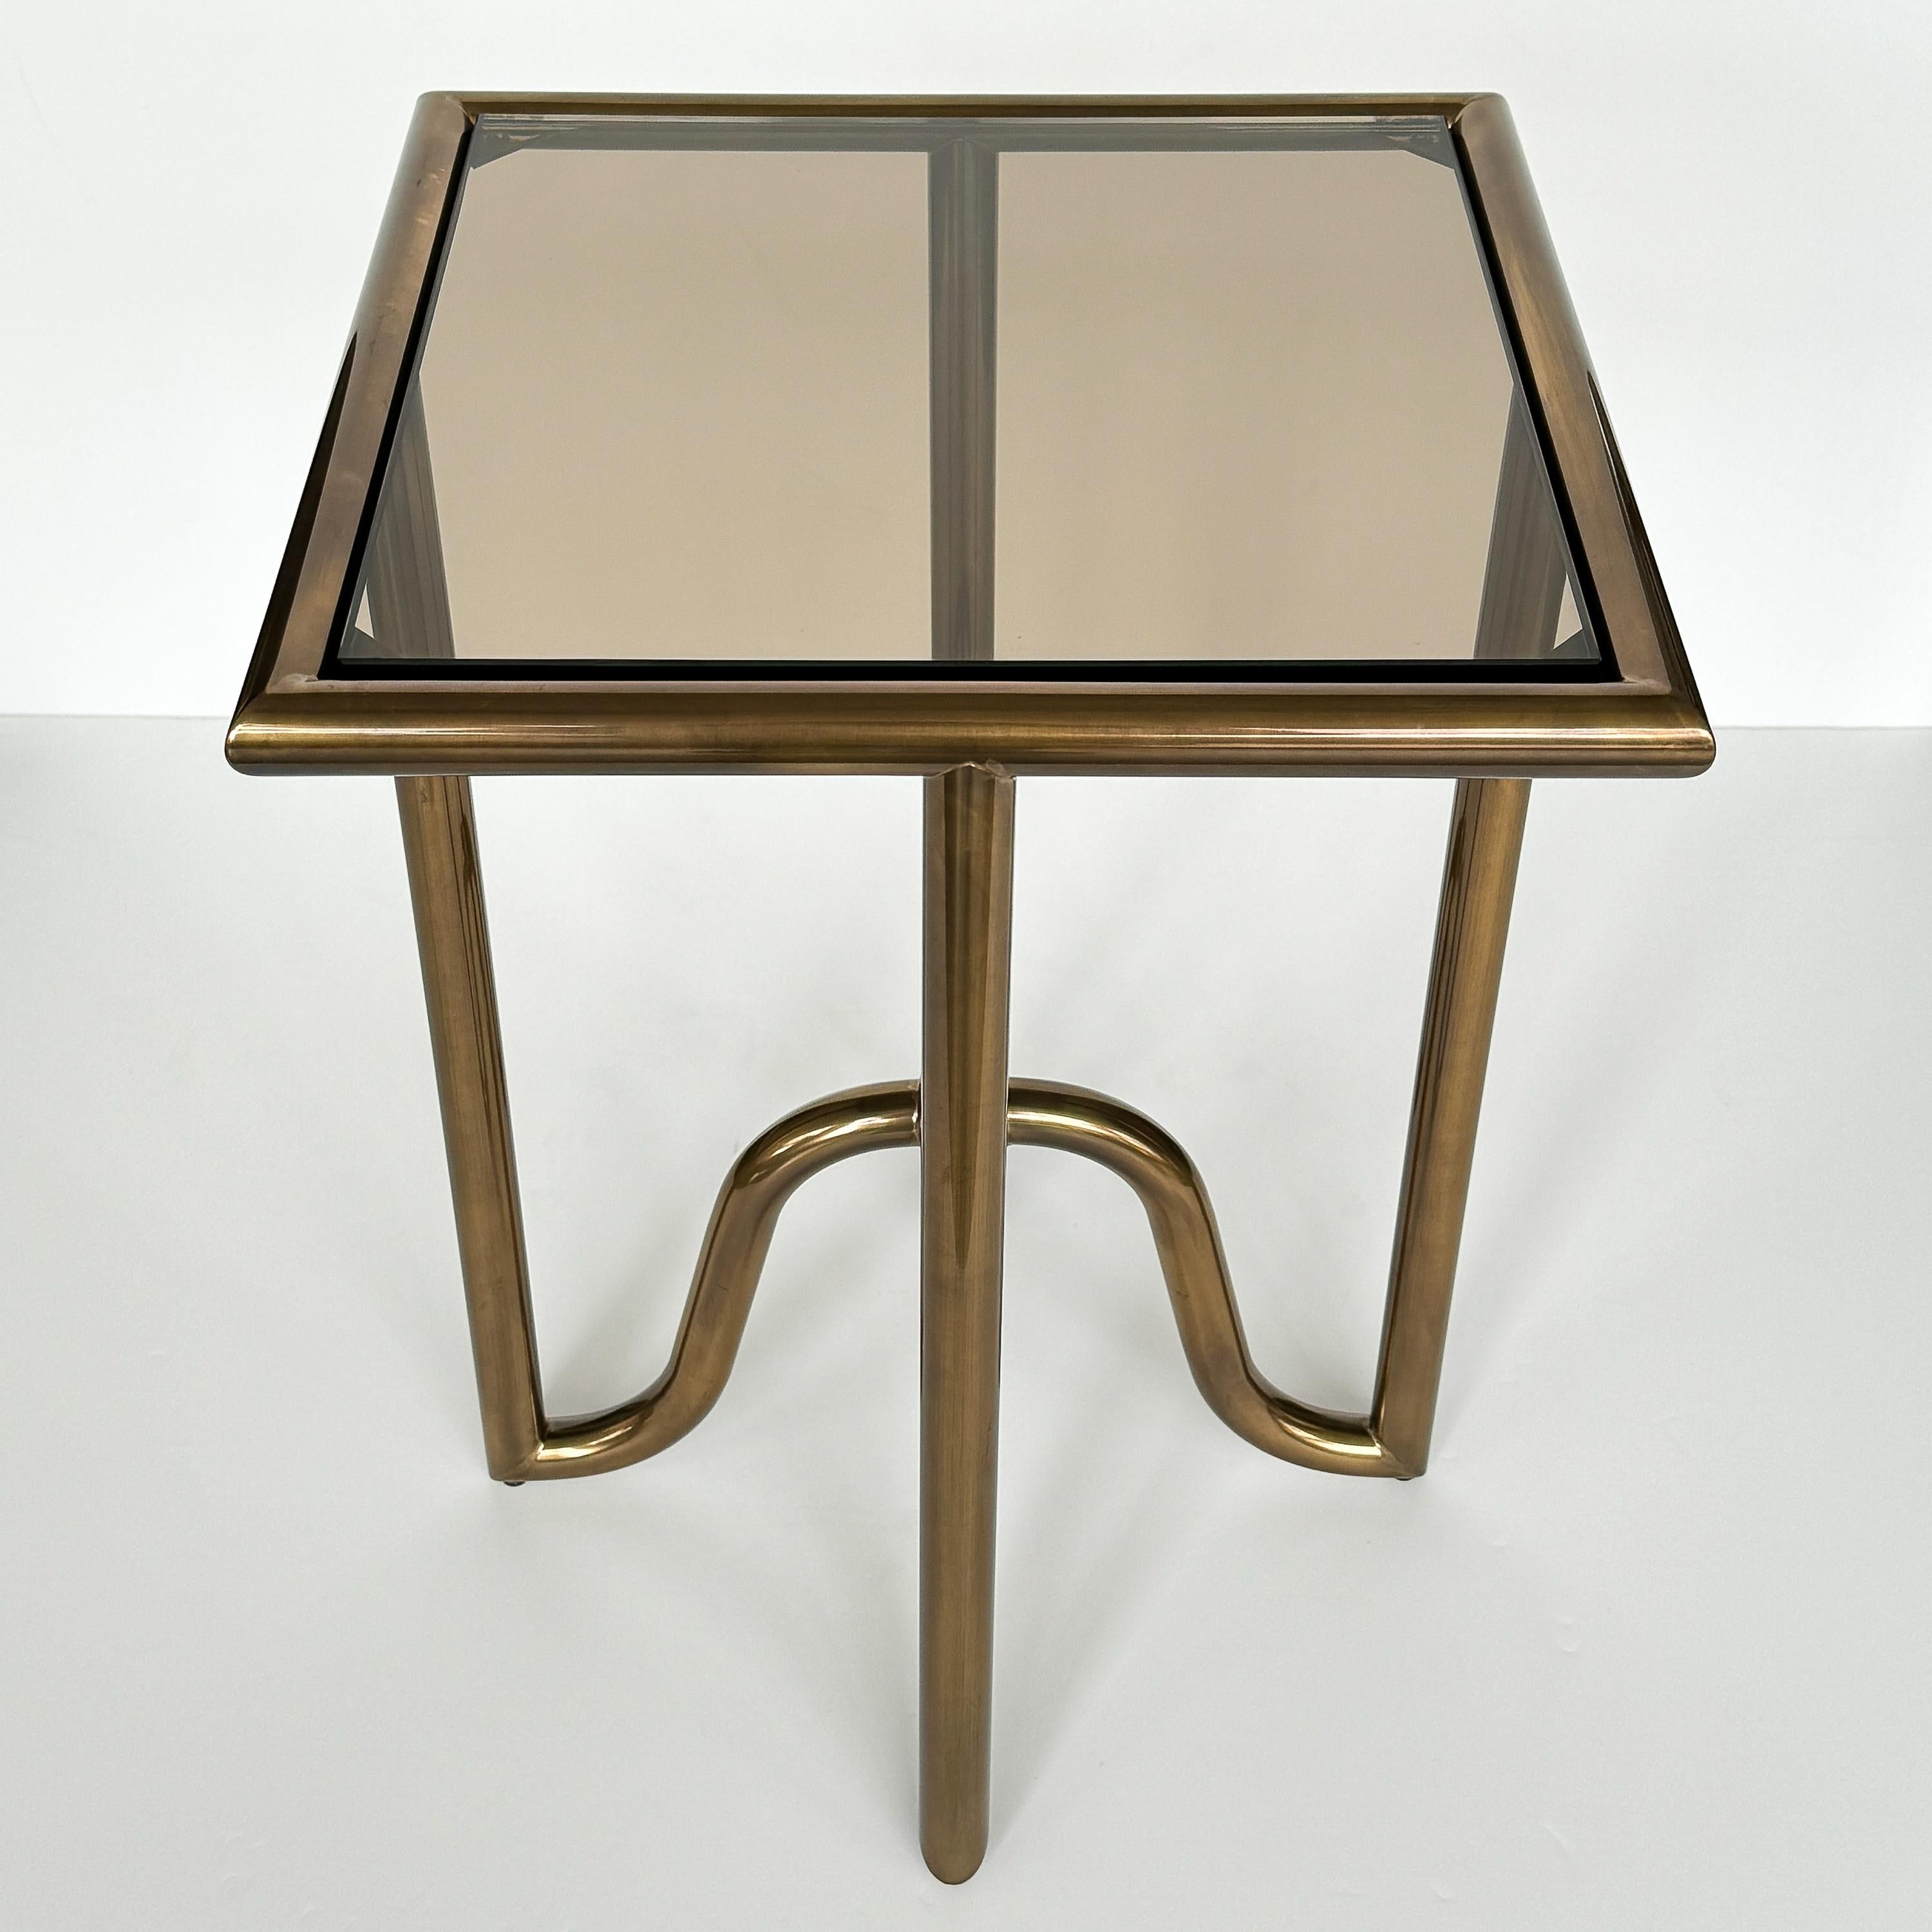 Introducing the Laura Kirar bronze Lien Tray side table for Baker Furniture, USA circa early 21st century. This exquisite piece boasts a lustrous tubular brass structure, 1